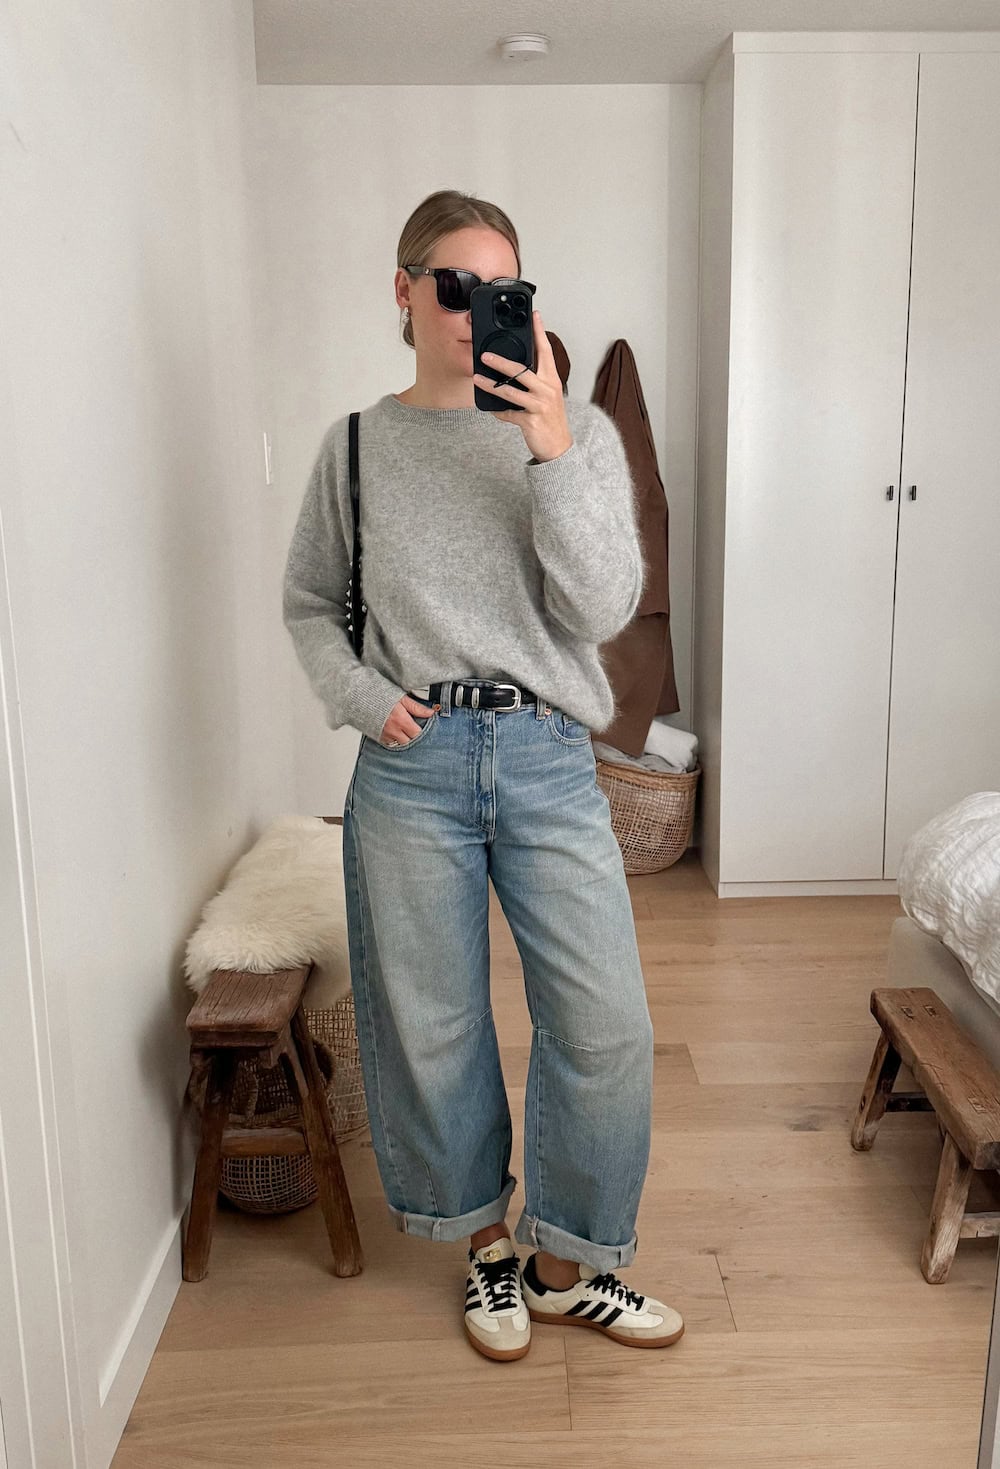 Christal wearing baggy ankle jeans, sneakers and a grey sweater.